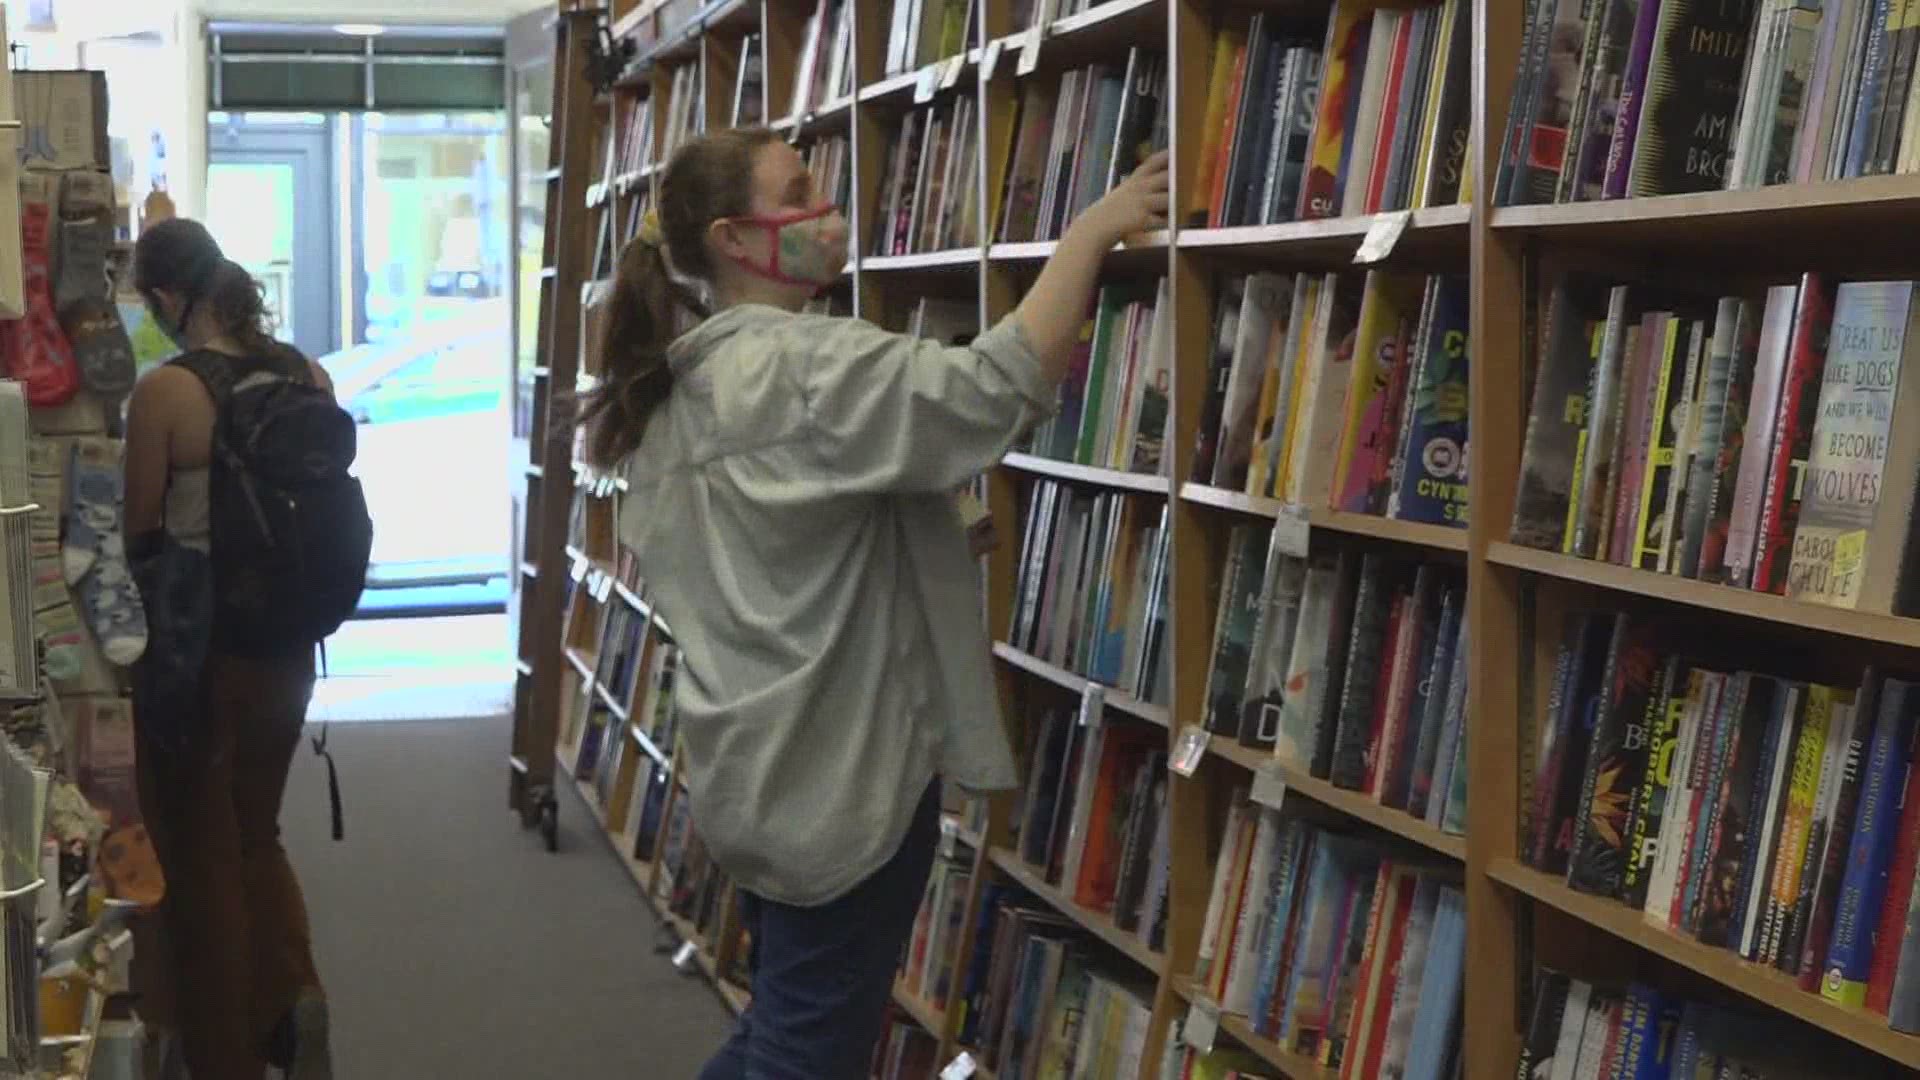 Most Maine bookstores have now weathered the storm, thanks to loyal customers.